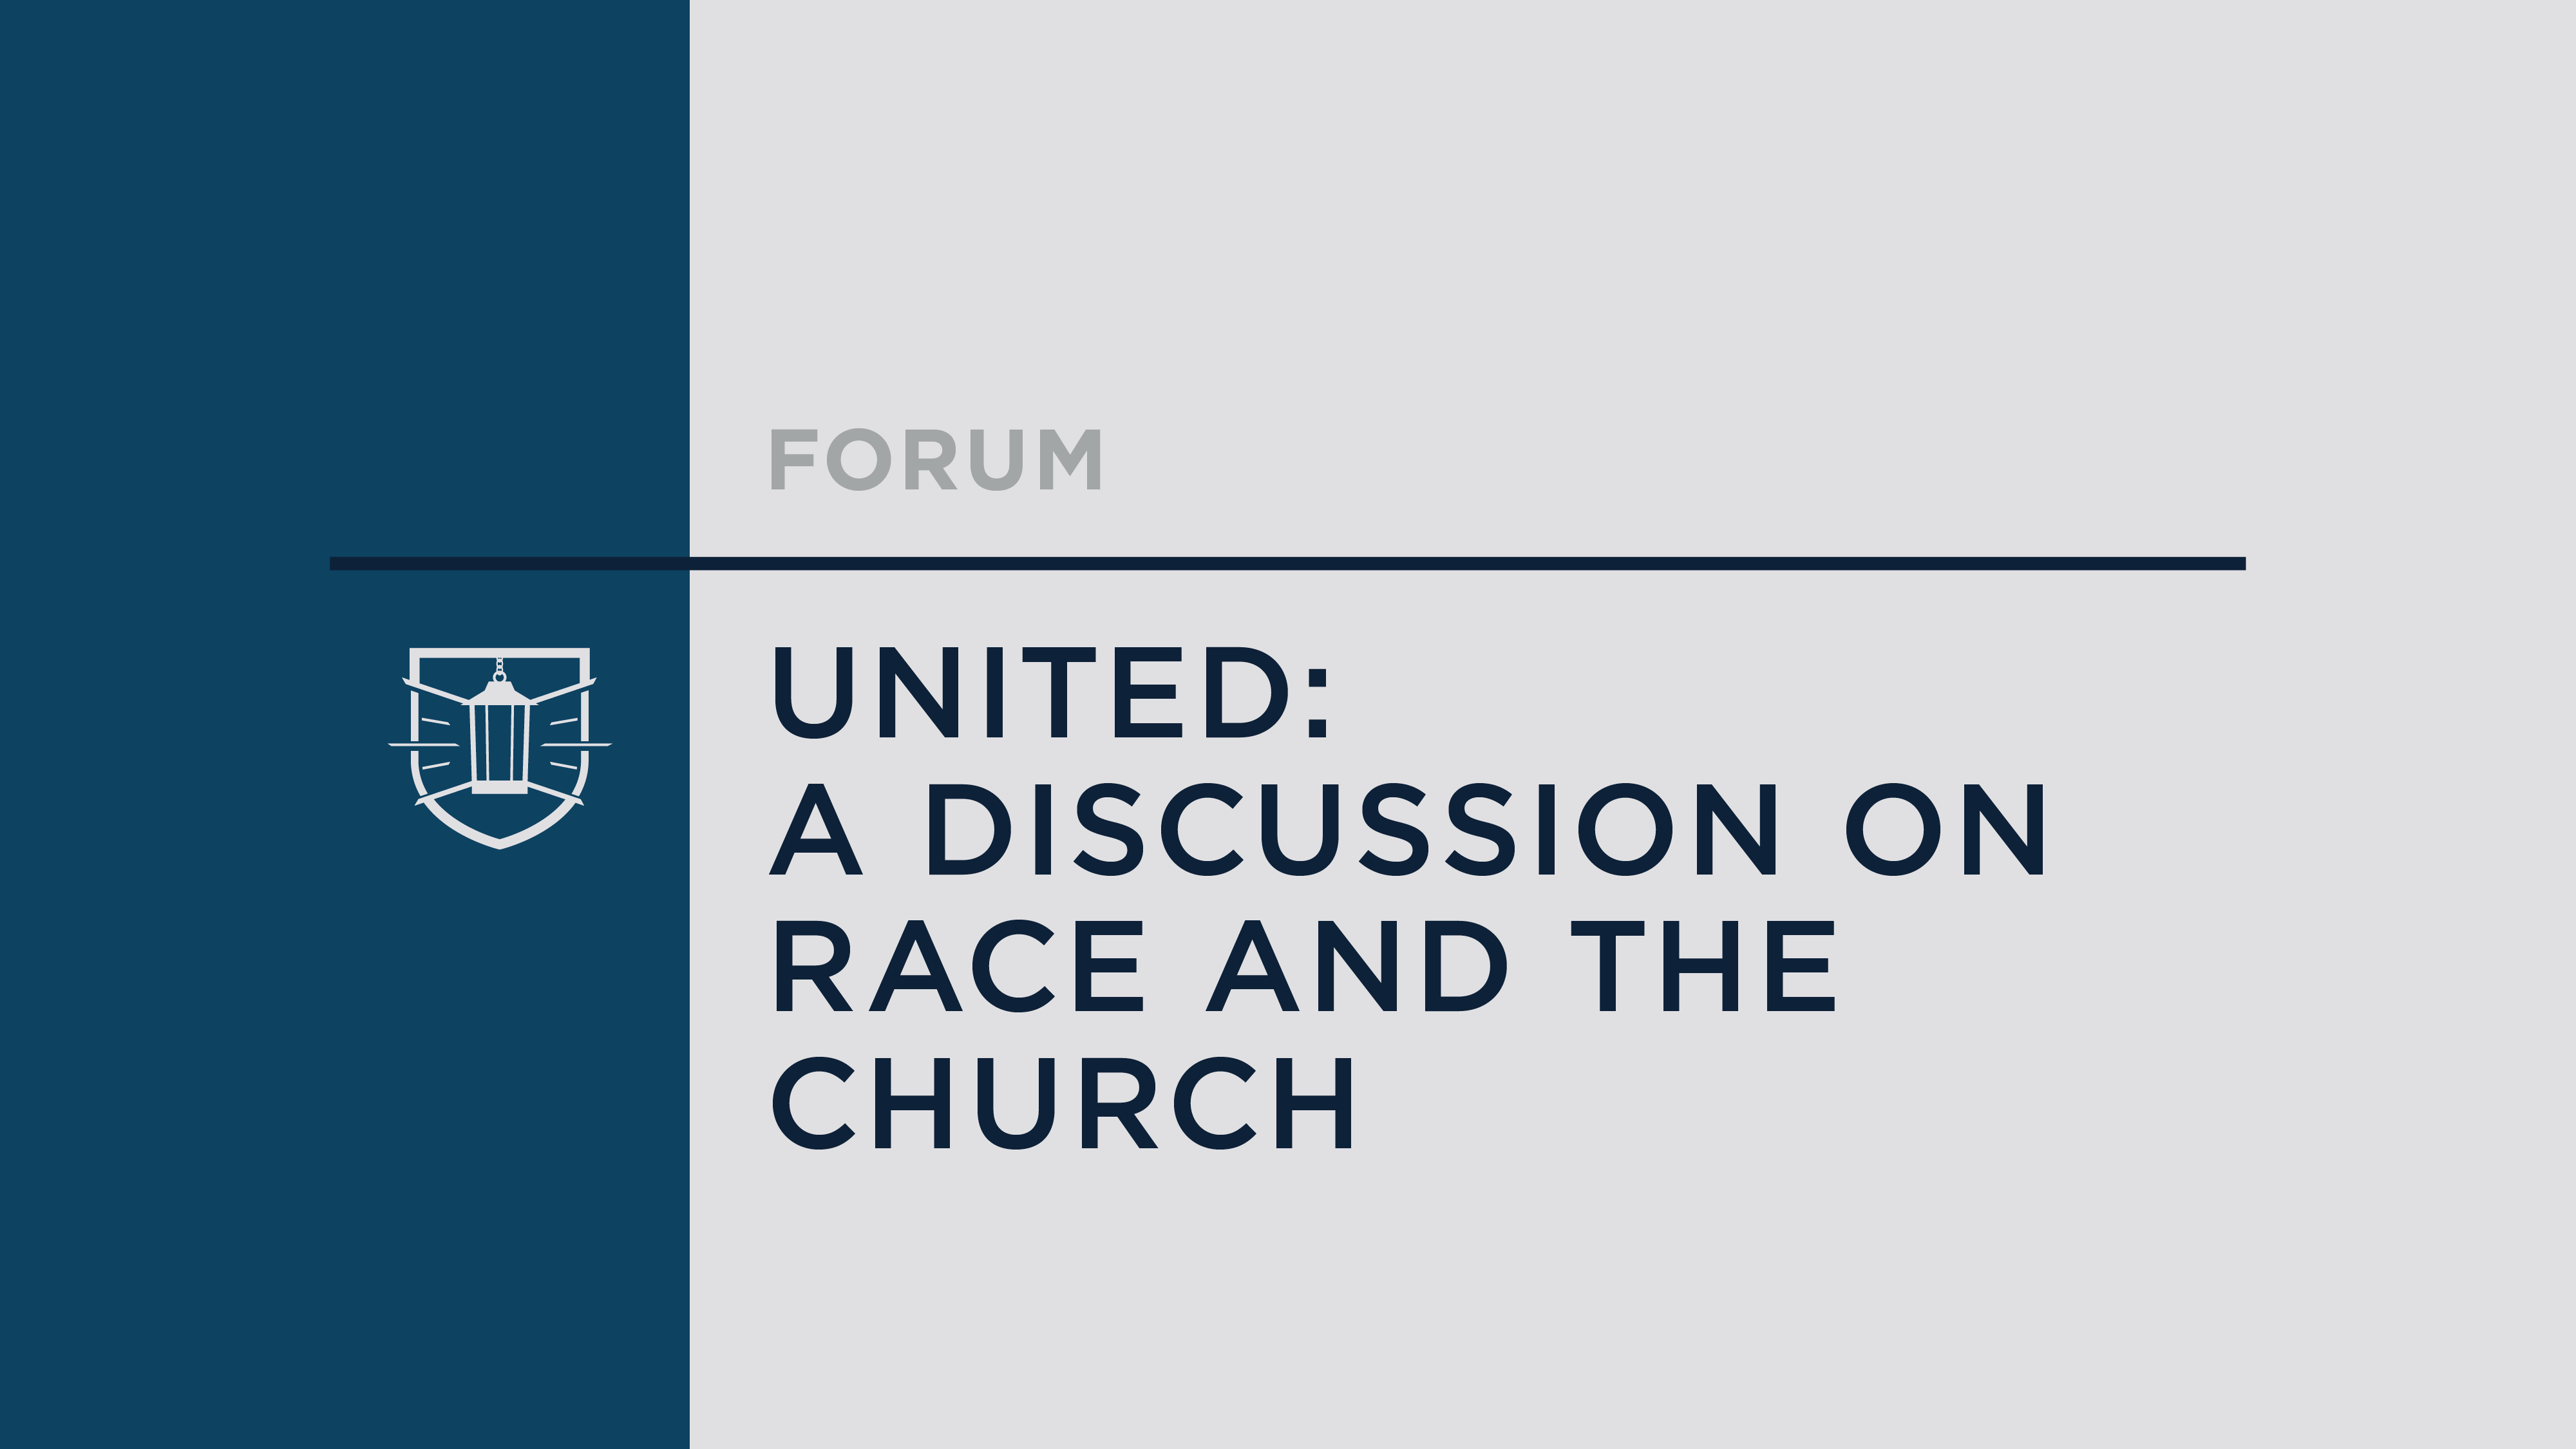 United: A Discussion on Race and the Church